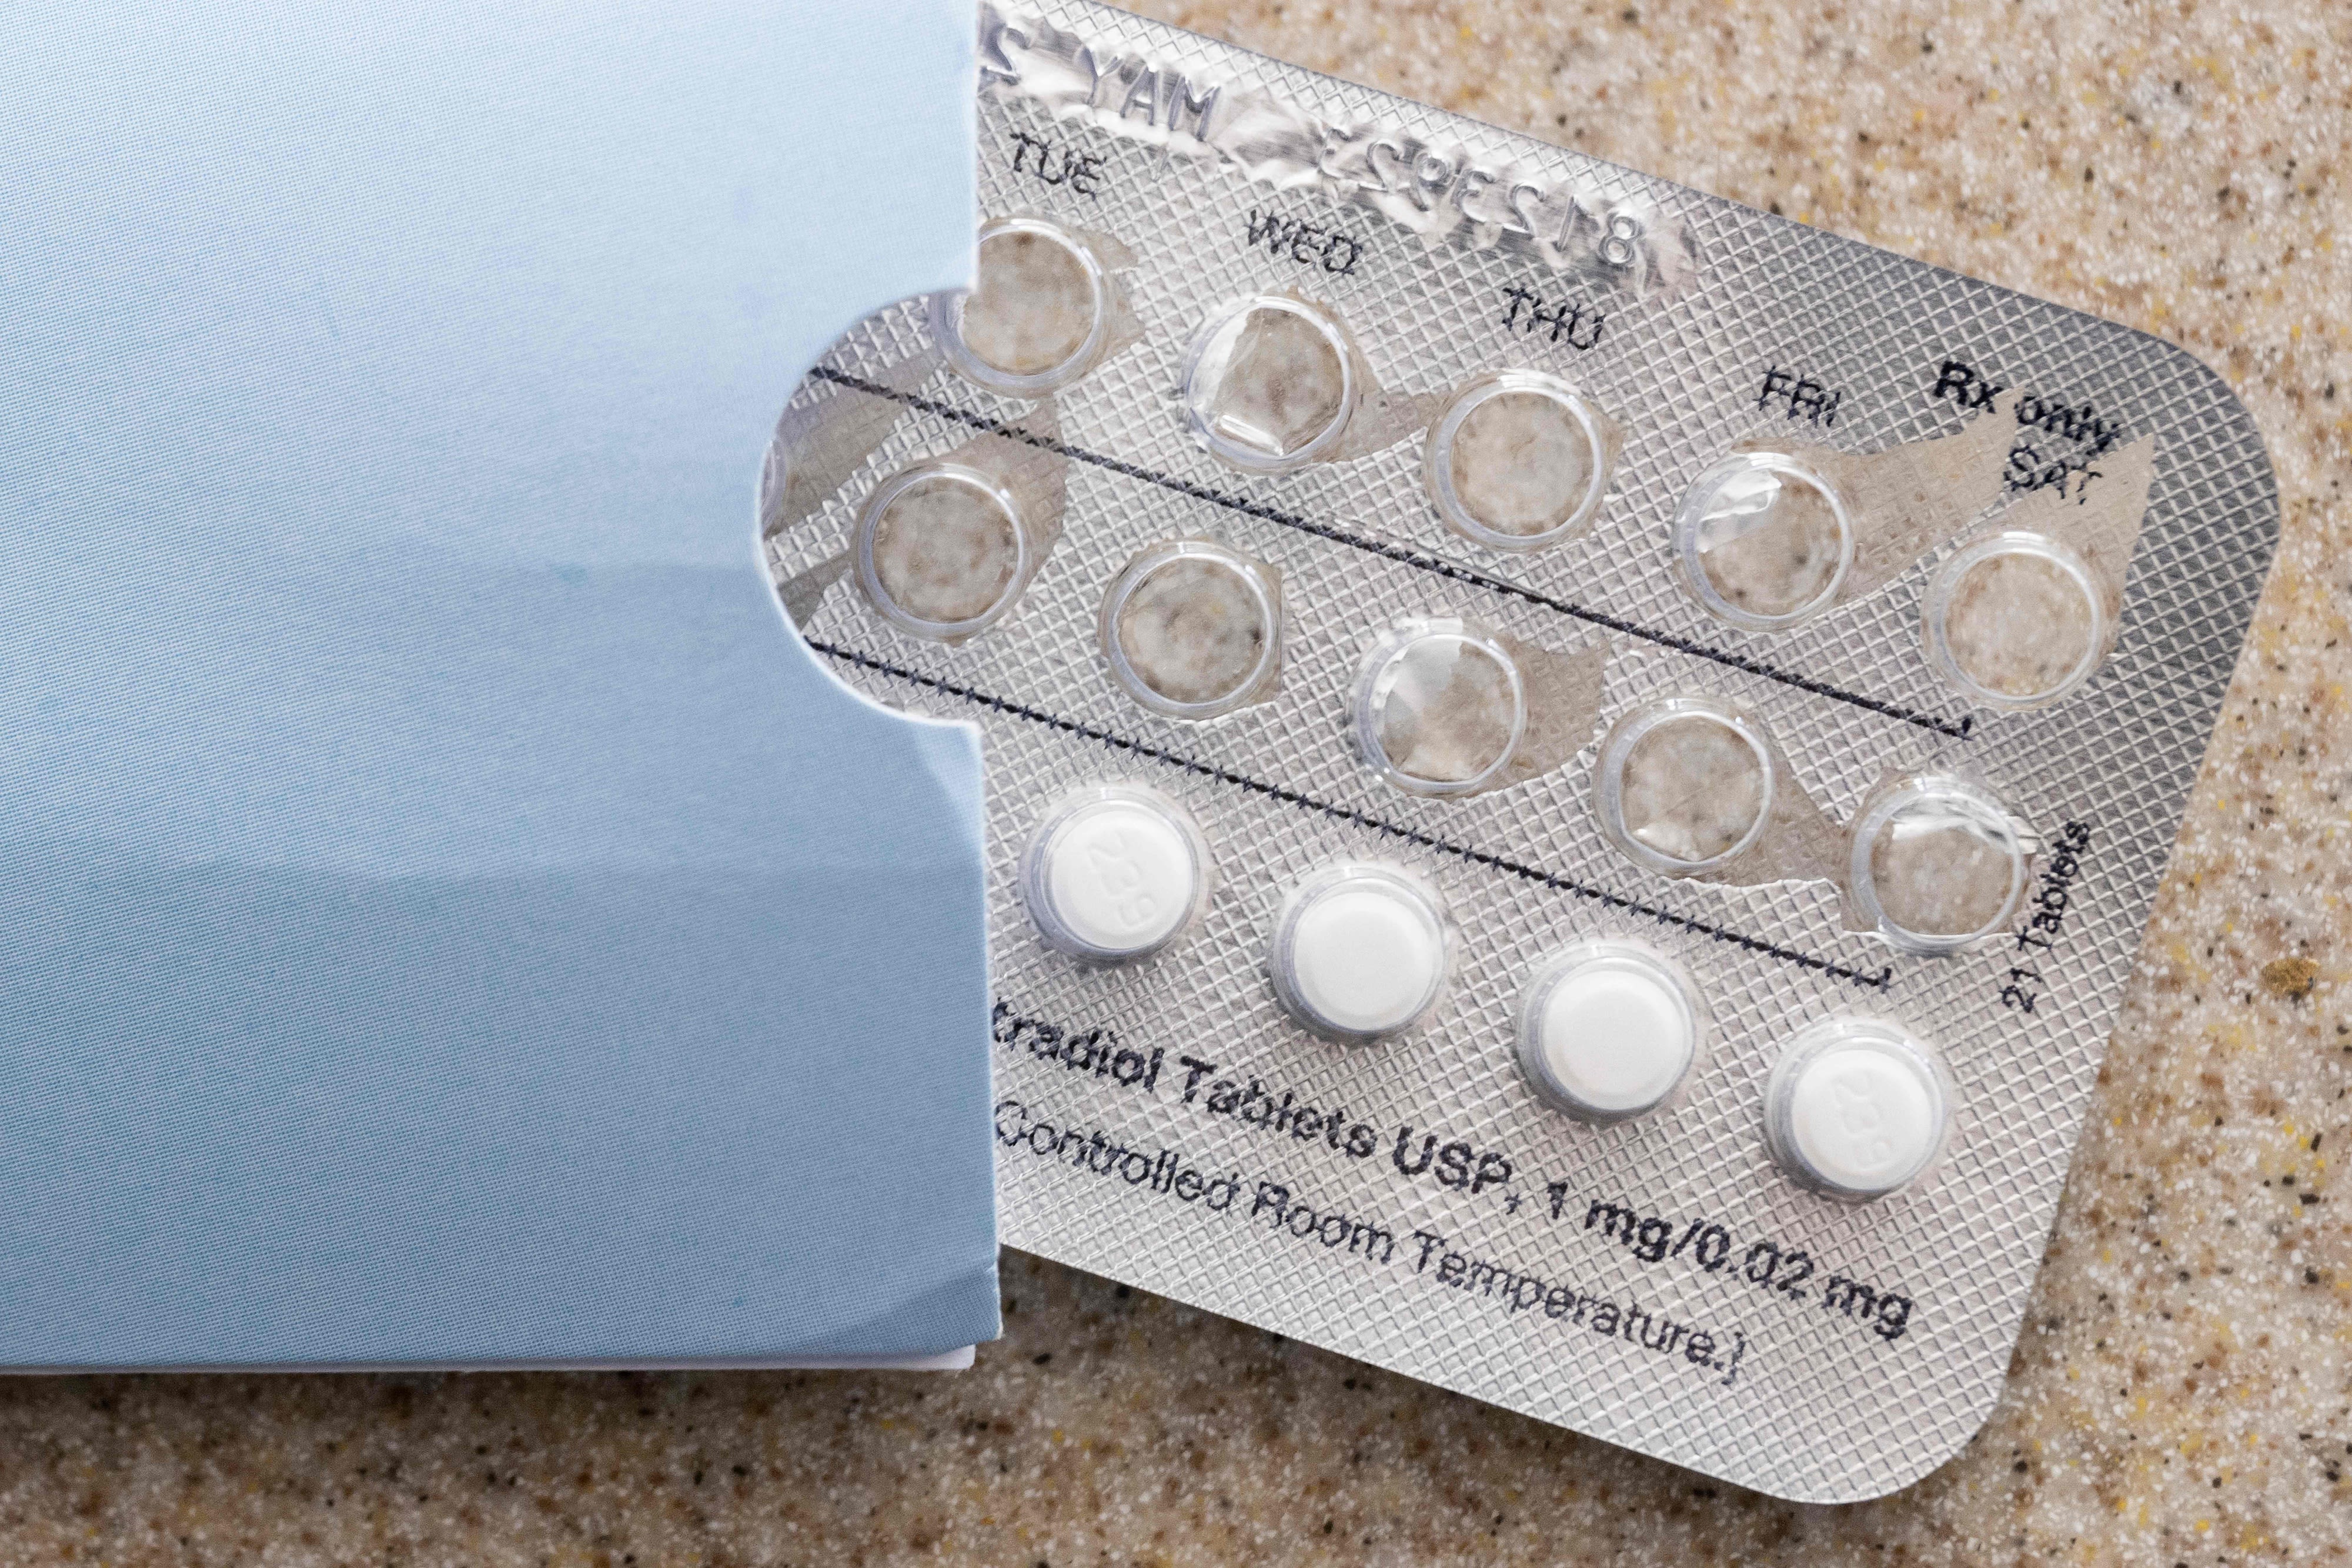 Conservative attacks on birth control could threaten access